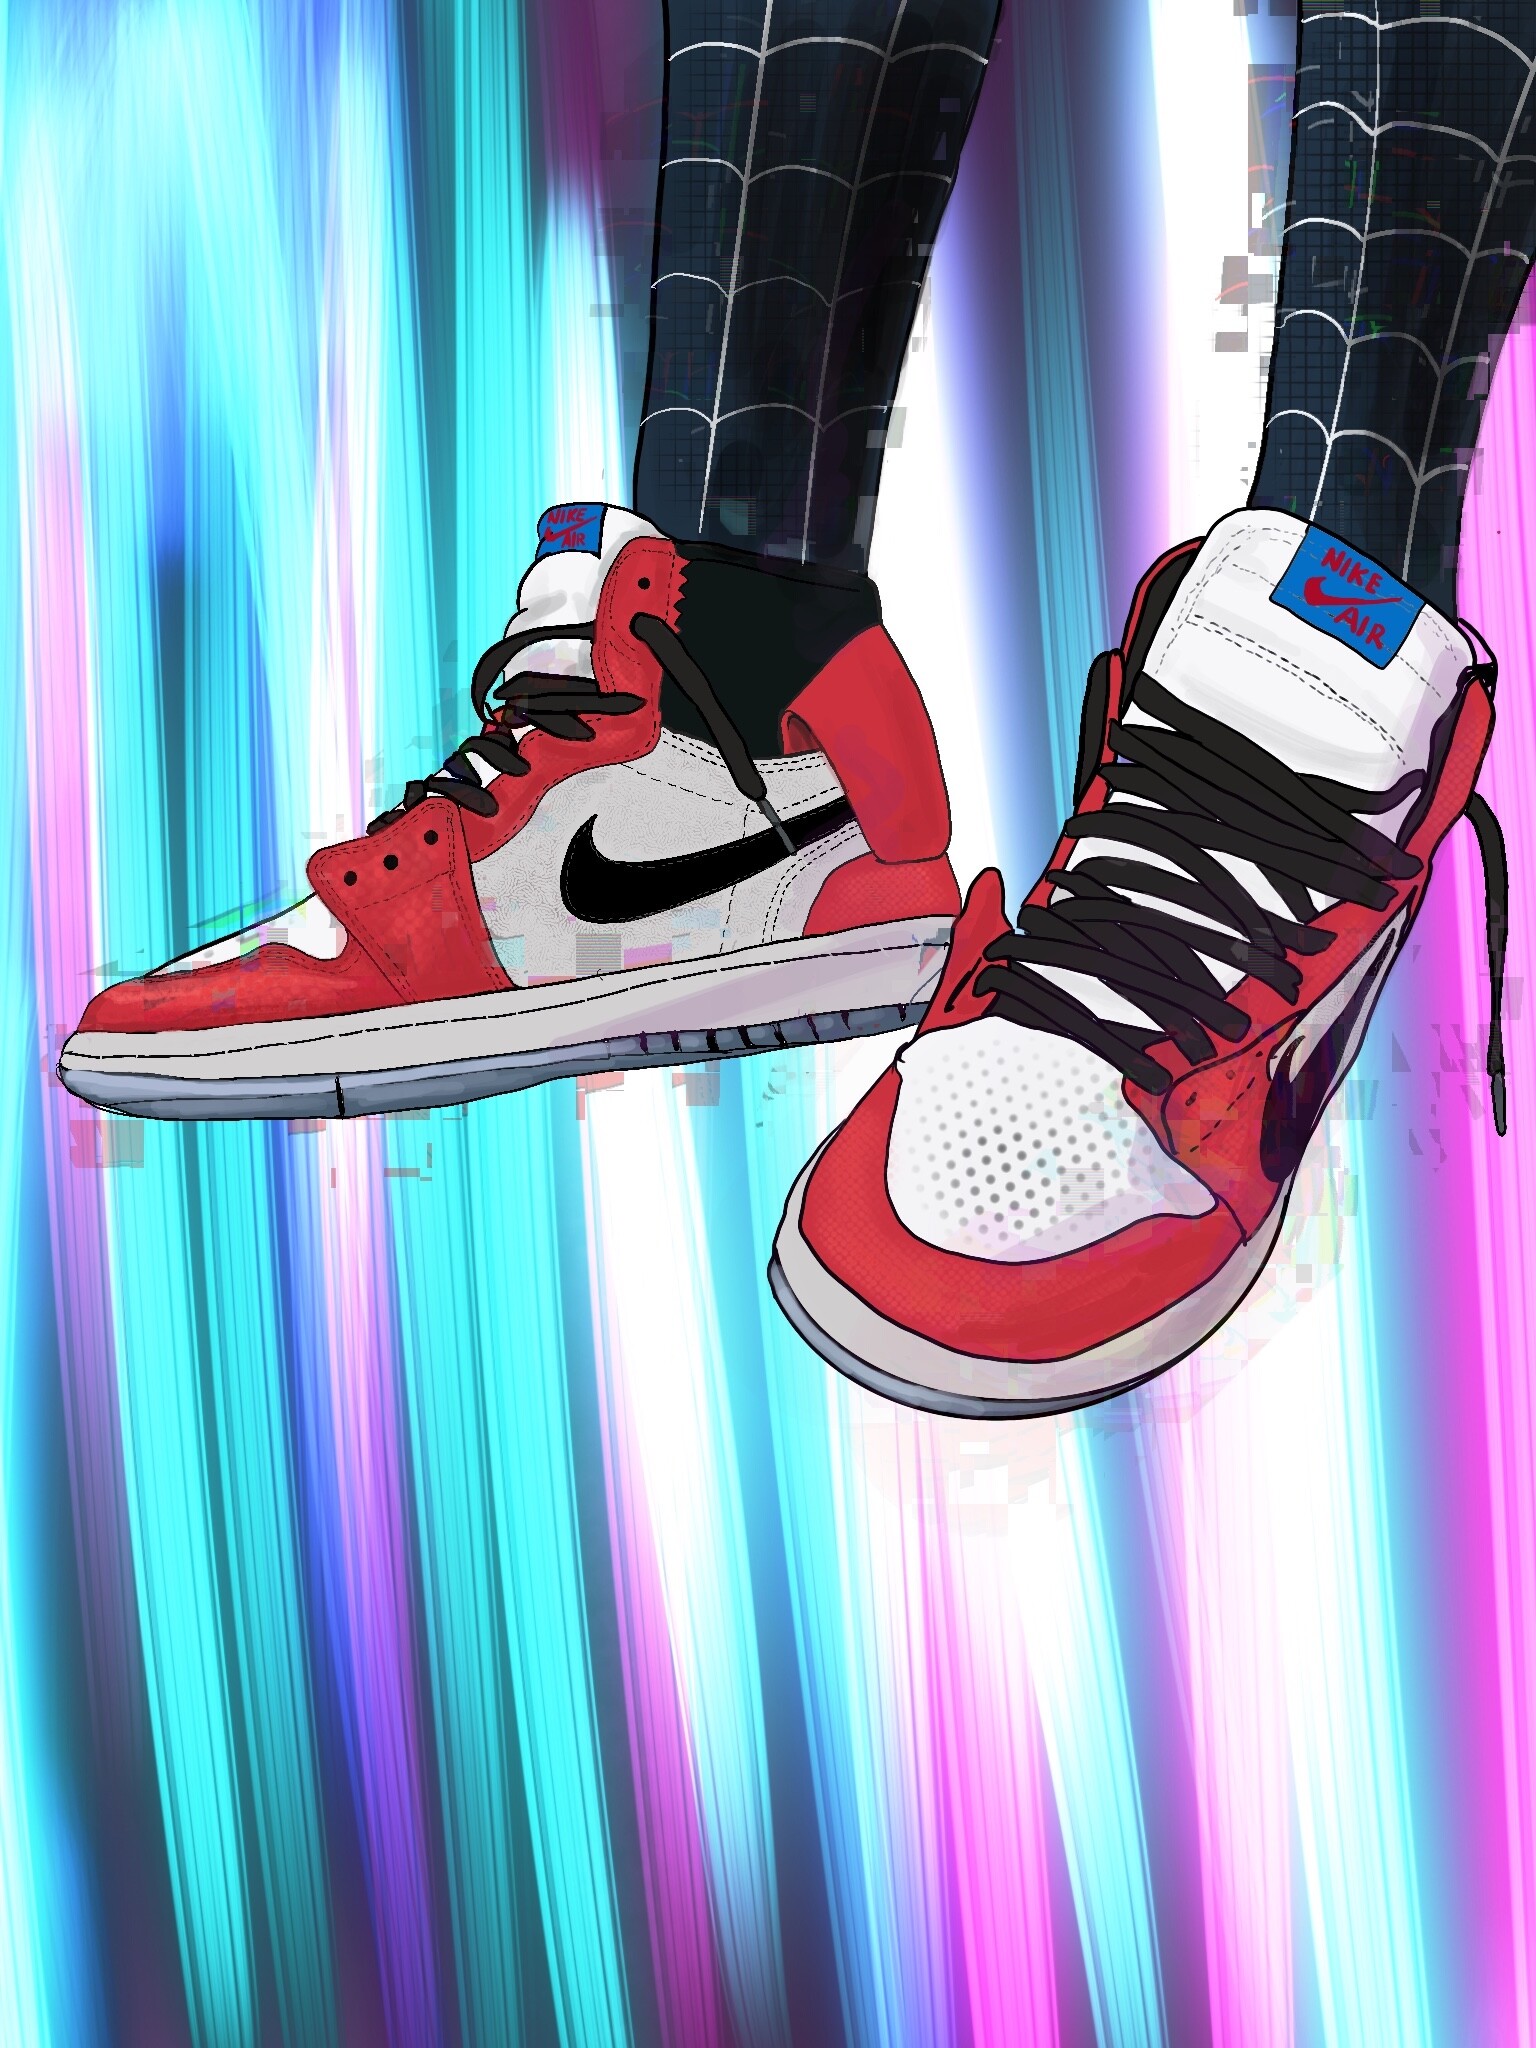 what nikes miles morales nike does miles morales wear, Off 60%, www.scrimaglio.com